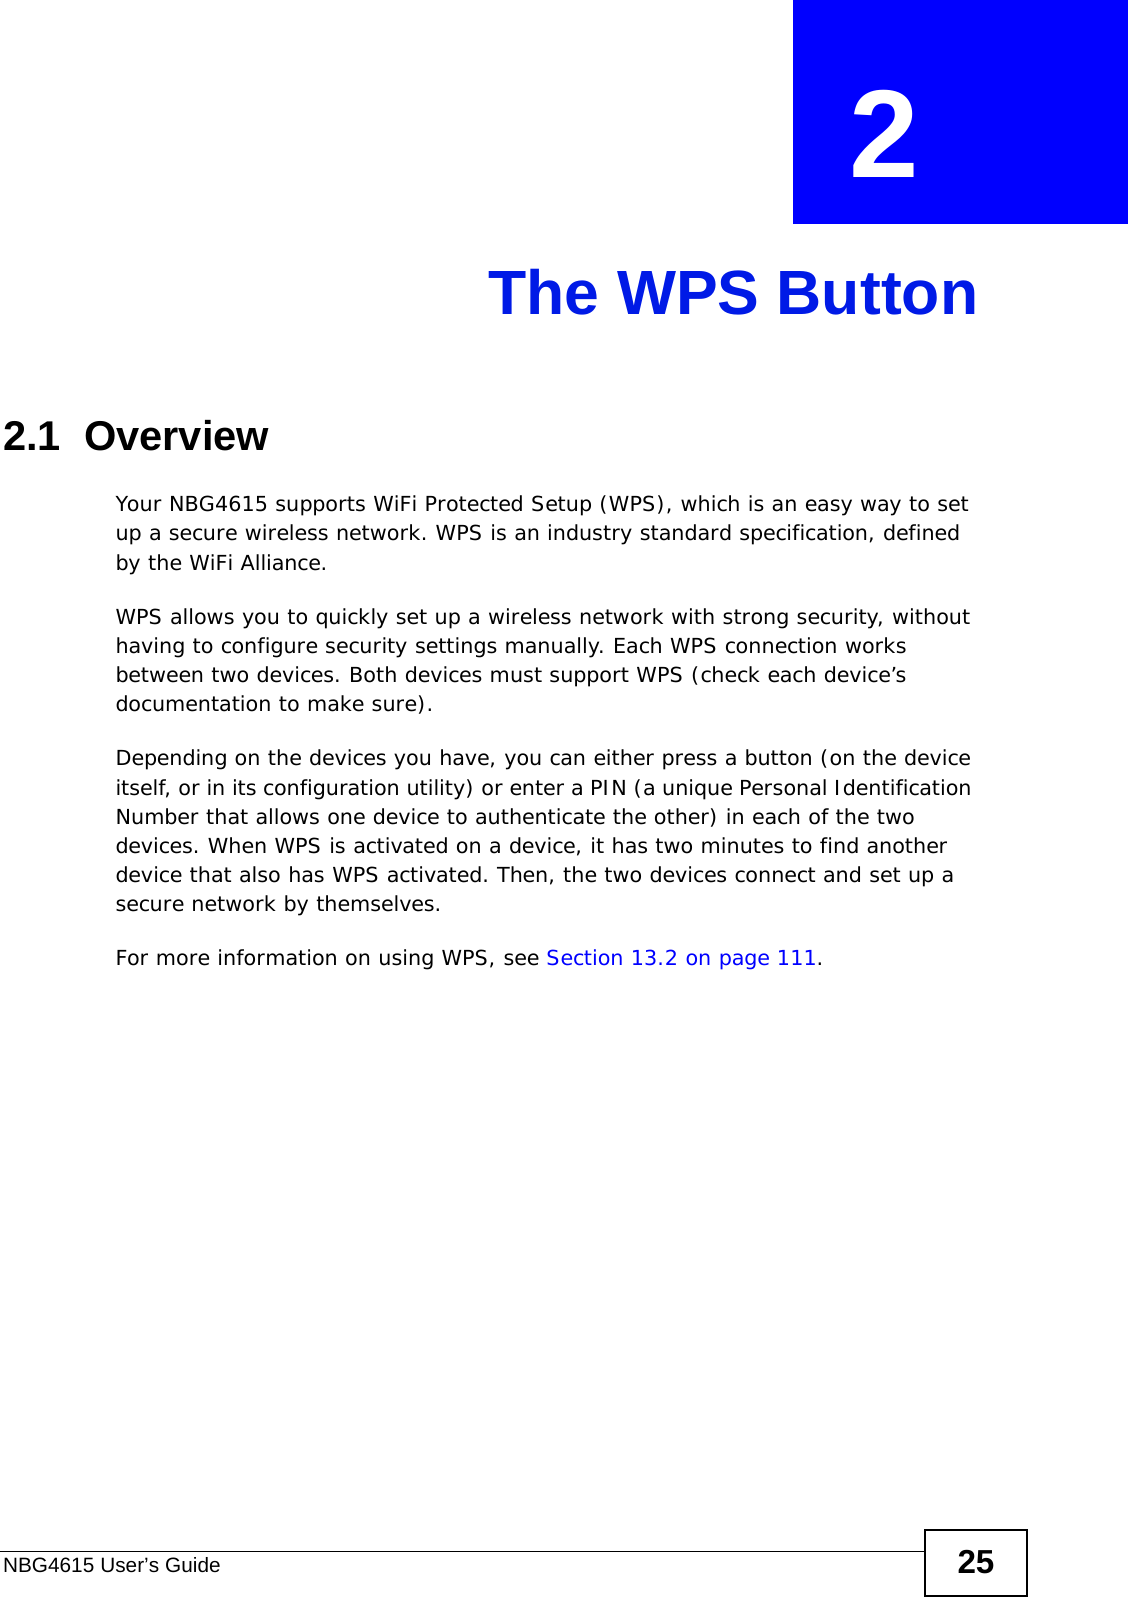 NBG4615 User’s Guide 25CHAPTER  2 The WPS Button2.1  OverviewYour NBG4615 supports WiFi Protected Setup (WPS), which is an easy way to set up a secure wireless network. WPS is an industry standard specification, defined by the WiFi Alliance.WPS allows you to quickly set up a wireless network with strong security, without having to configure security settings manually. Each WPS connection works between two devices. Both devices must support WPS (check each device’s documentation to make sure). Depending on the devices you have, you can either press a button (on the device itself, or in its configuration utility) or enter a PIN (a unique Personal Identification Number that allows one device to authenticate the other) in each of the two devices. When WPS is activated on a device, it has two minutes to find another device that also has WPS activated. Then, the two devices connect and set up a secure network by themselves.For more information on using WPS, see Section 13.2 on page 111.